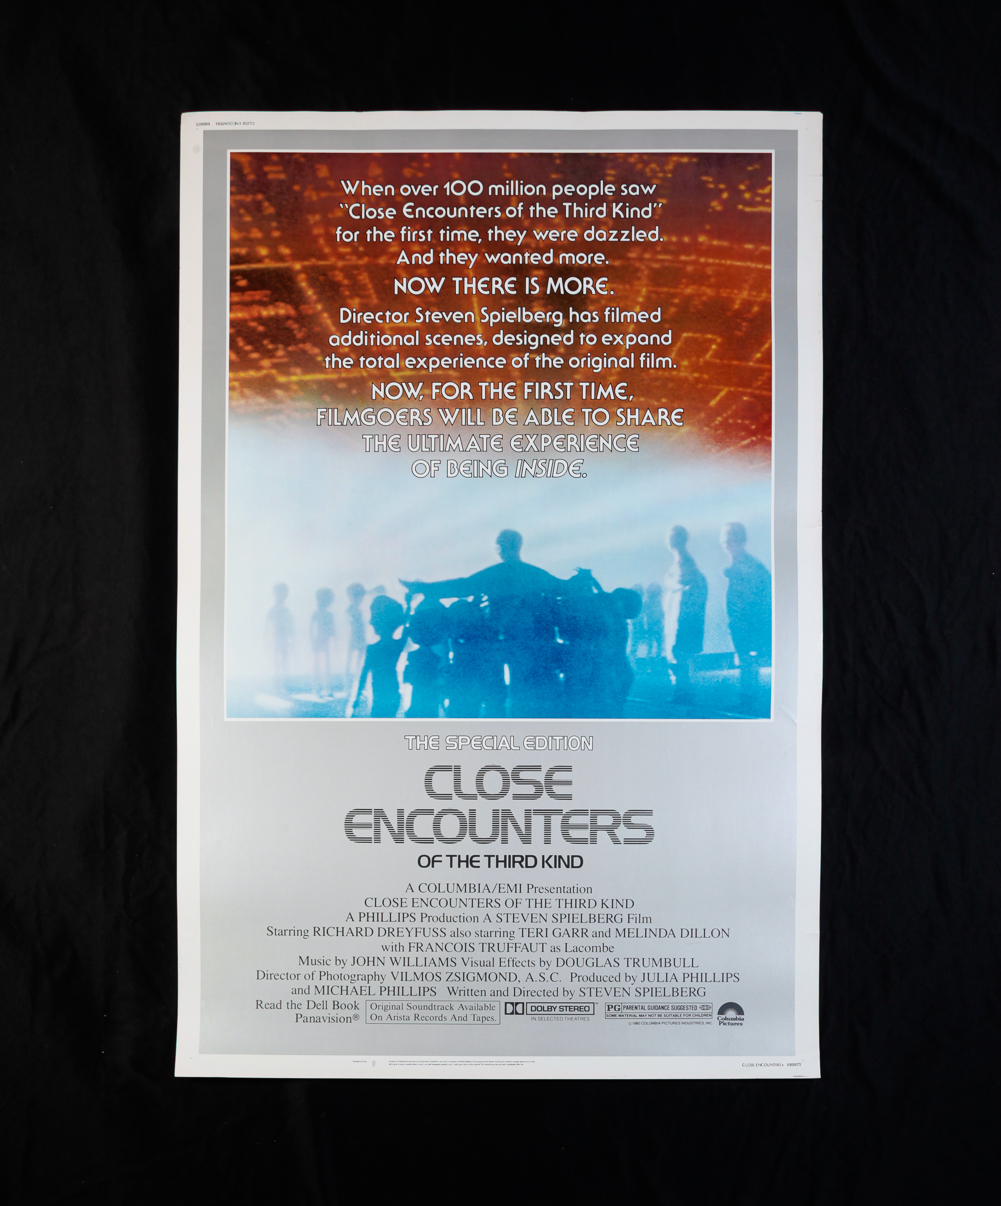 CLOSE ENCOUNTERS OF THE THIRD KIND (R-1980).